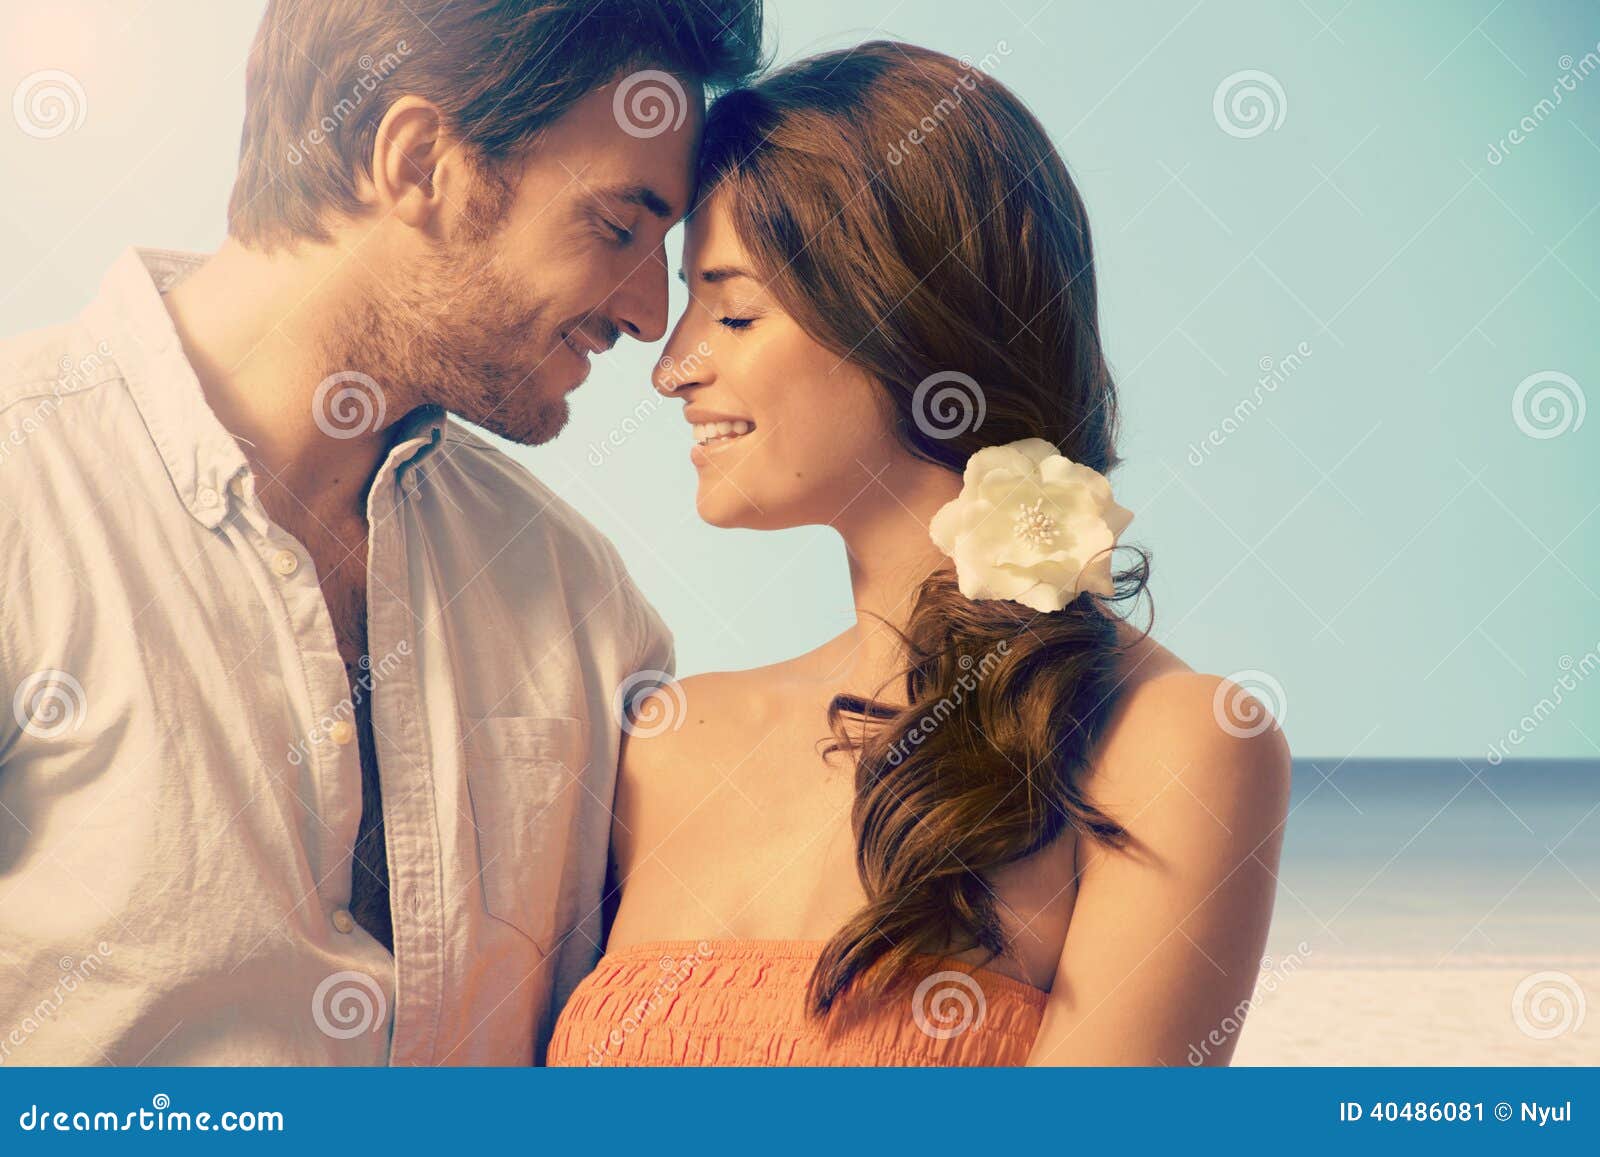 Young Married Couple Having A Romantic Moment Stock Image Image Of